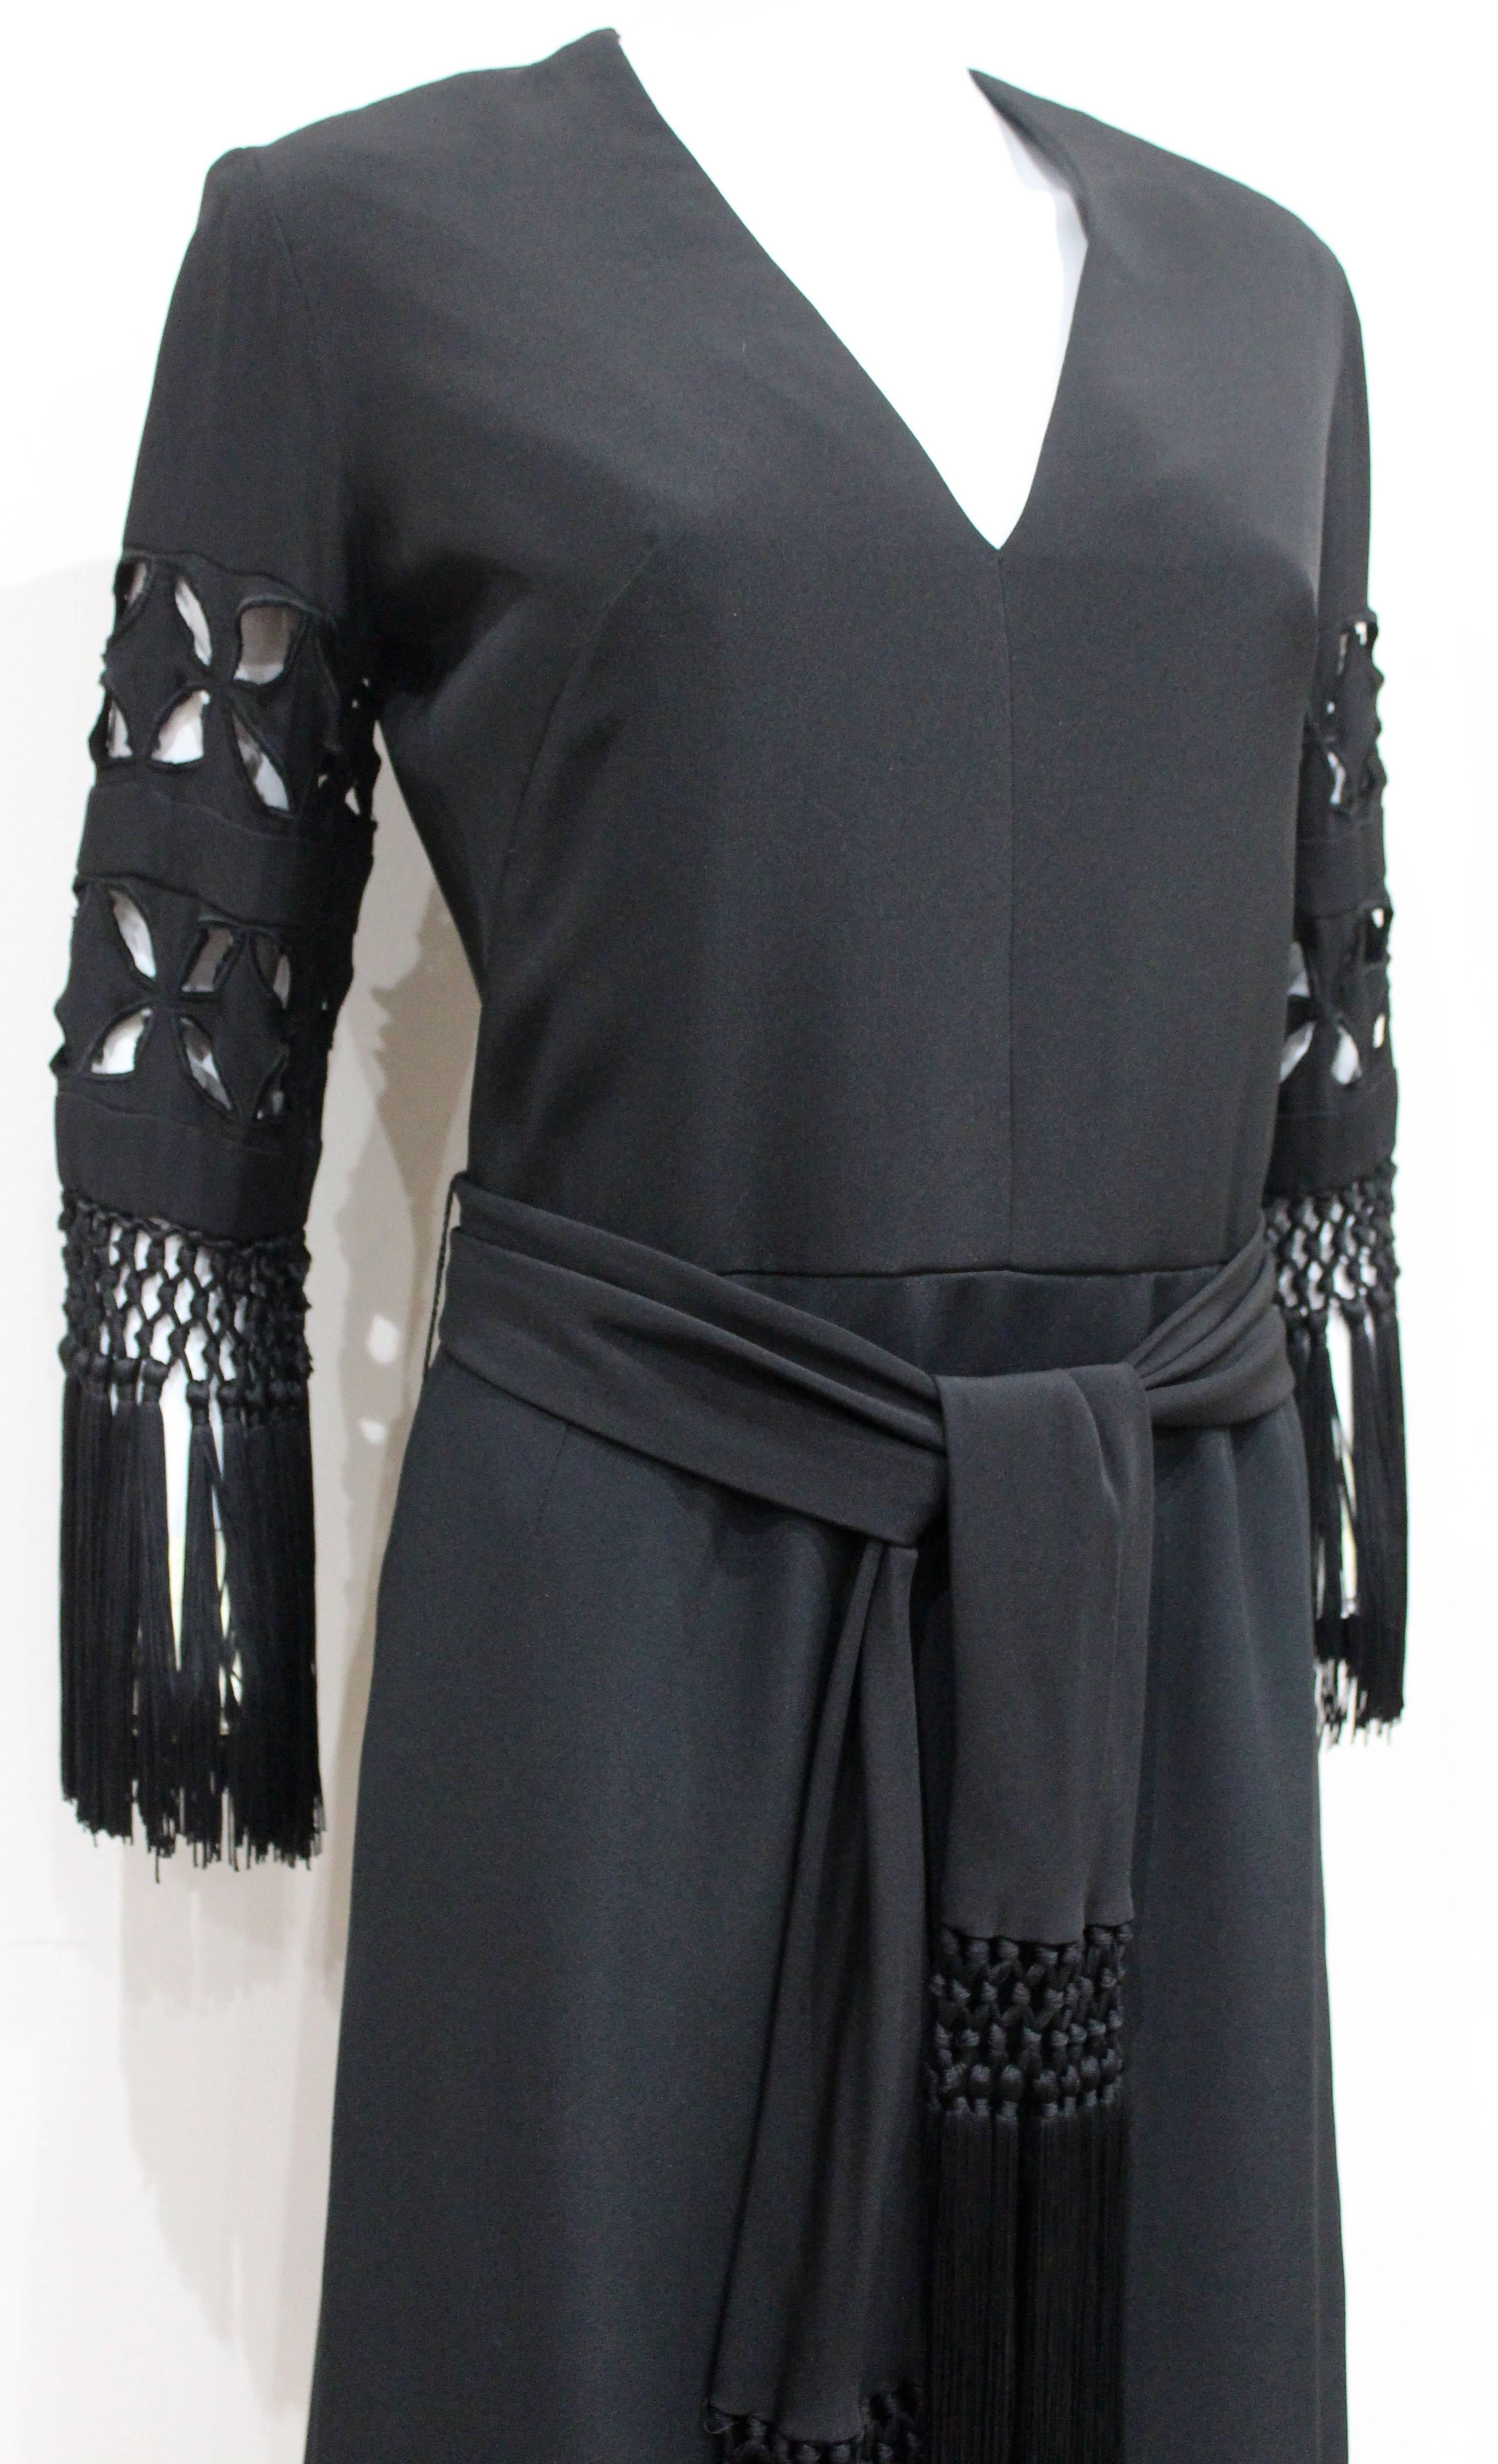 Rahvis, 19 Upper Grosvenor Street, London

1940s Black silk cocktail dress with cut out tasseled sleeves and matching tasseled waist belt. 

Approx. UK 10 - 12 / Fr 38 - 40

Pristine Condition